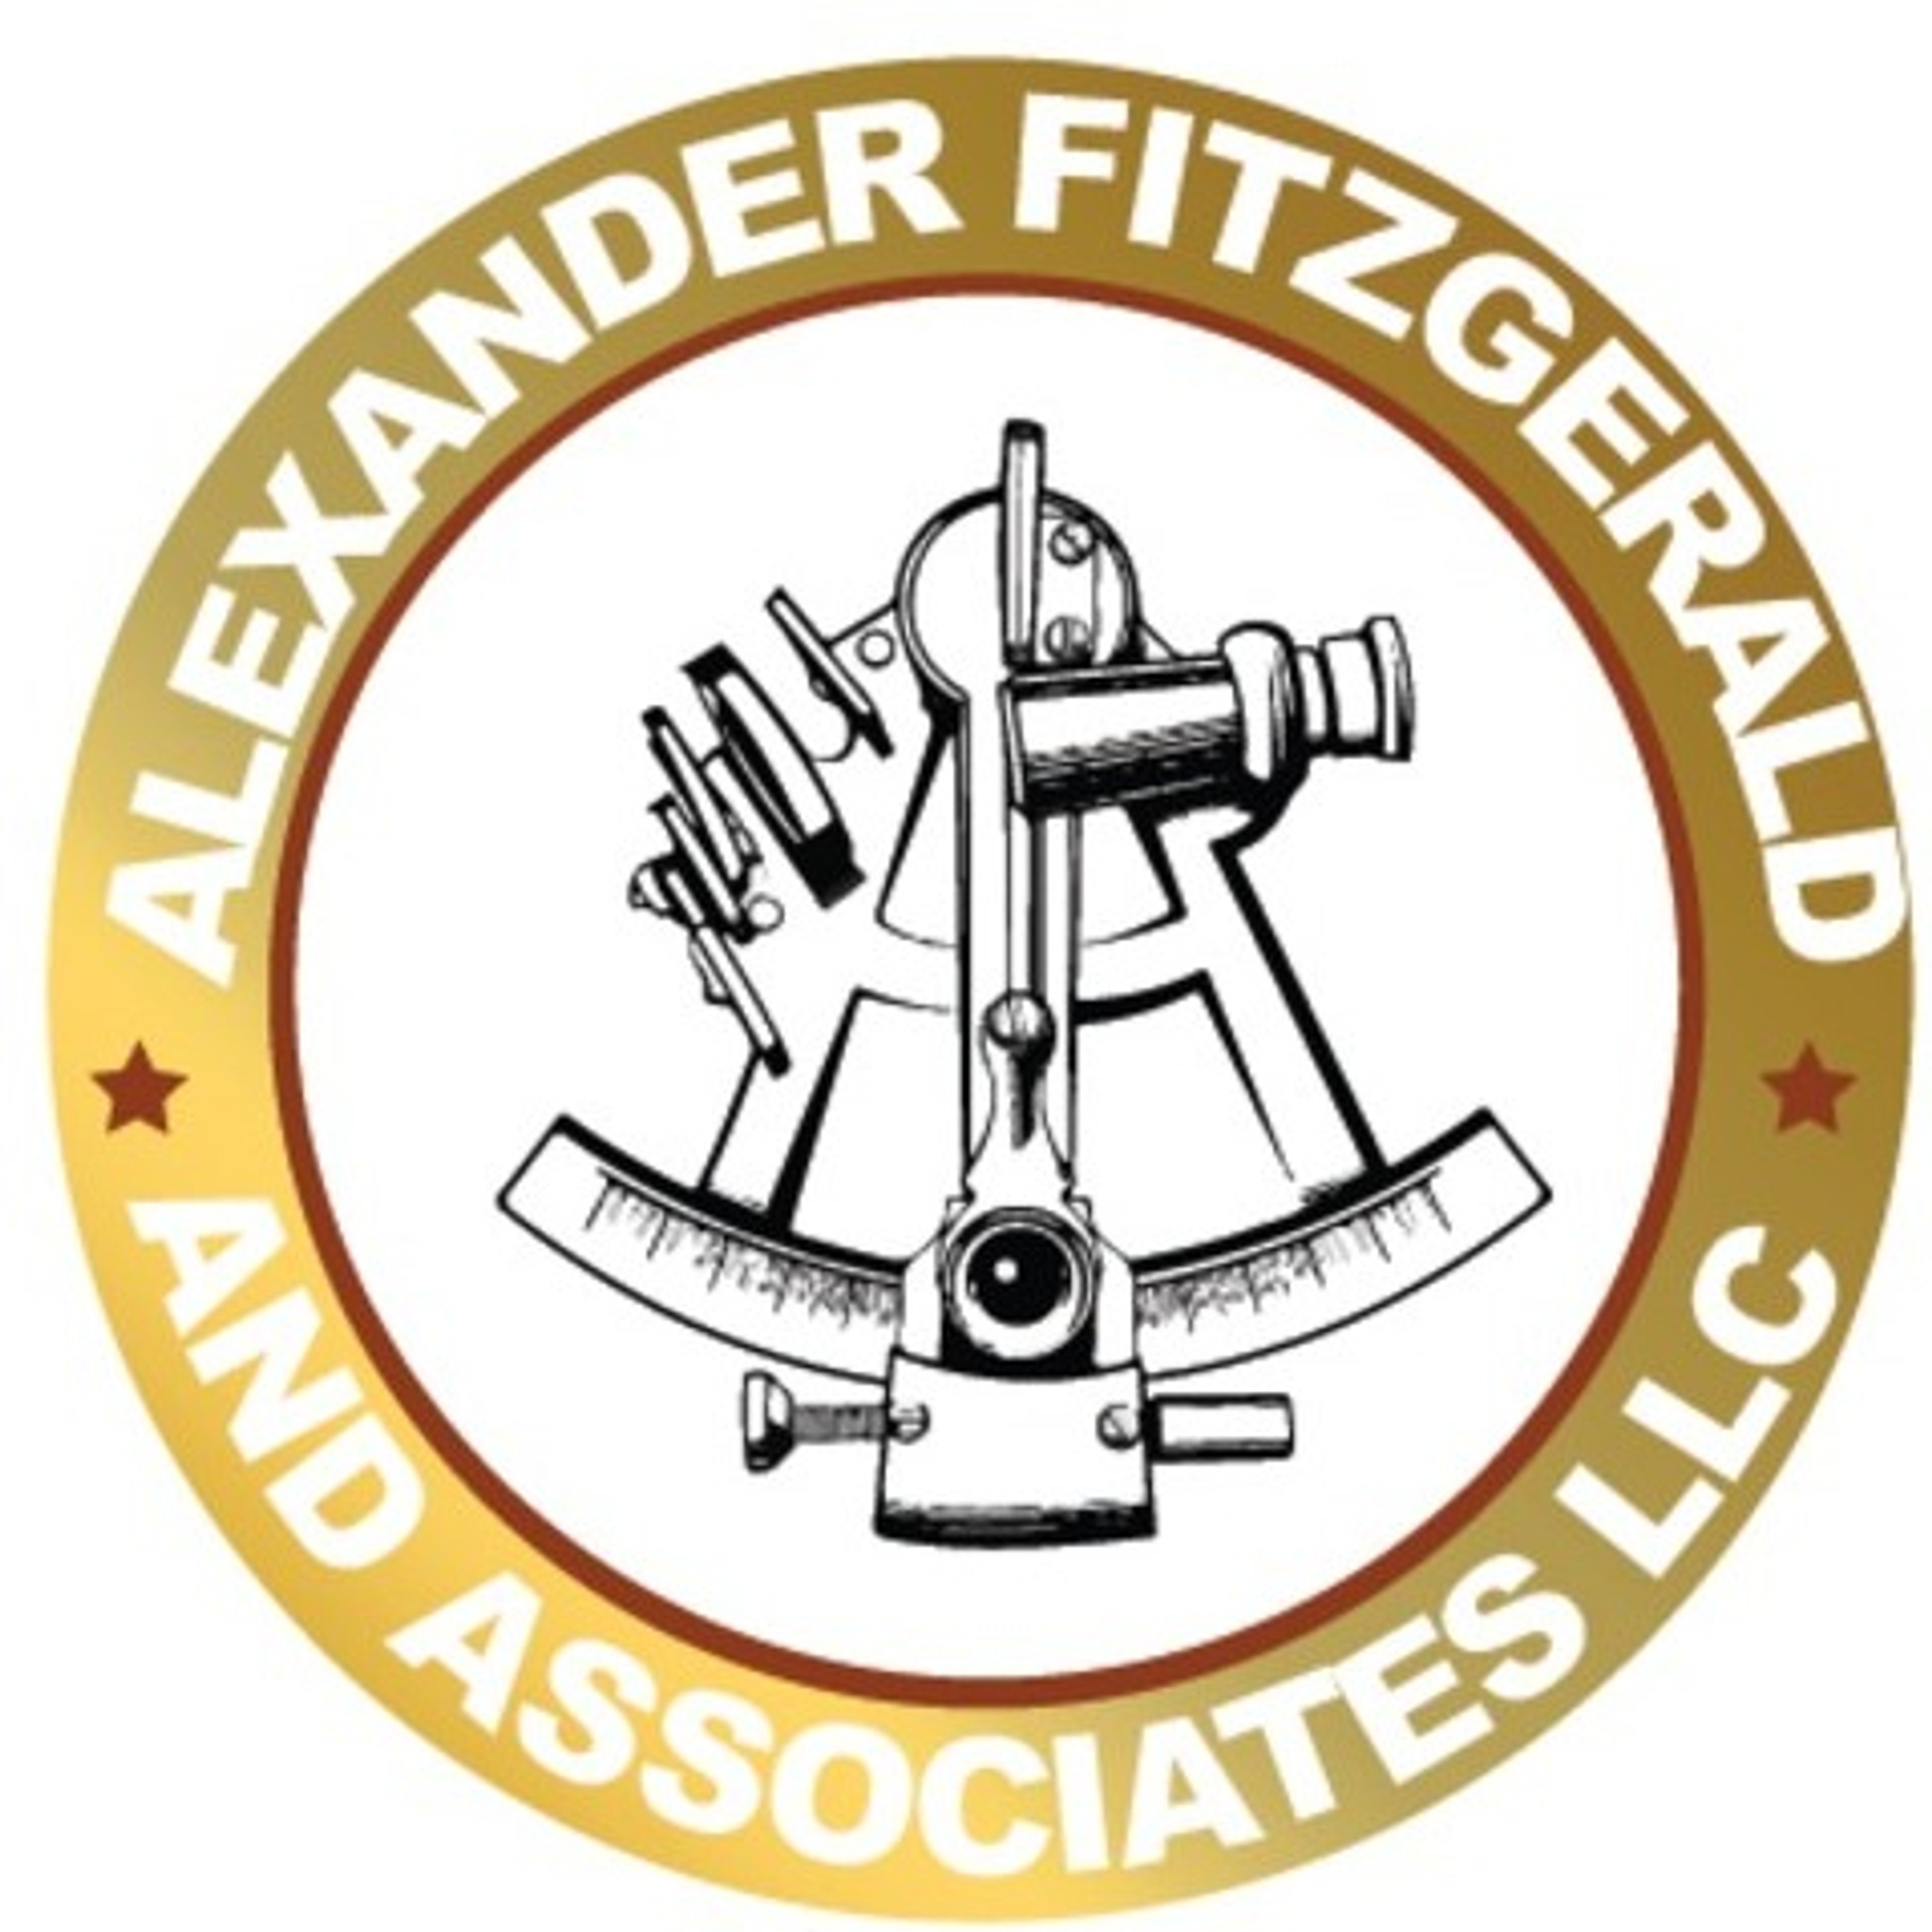 Alexander Fitzgerald & Associates LLC. We are a boutique firm of Accountants, Tax Advisors, and Management Consultants.